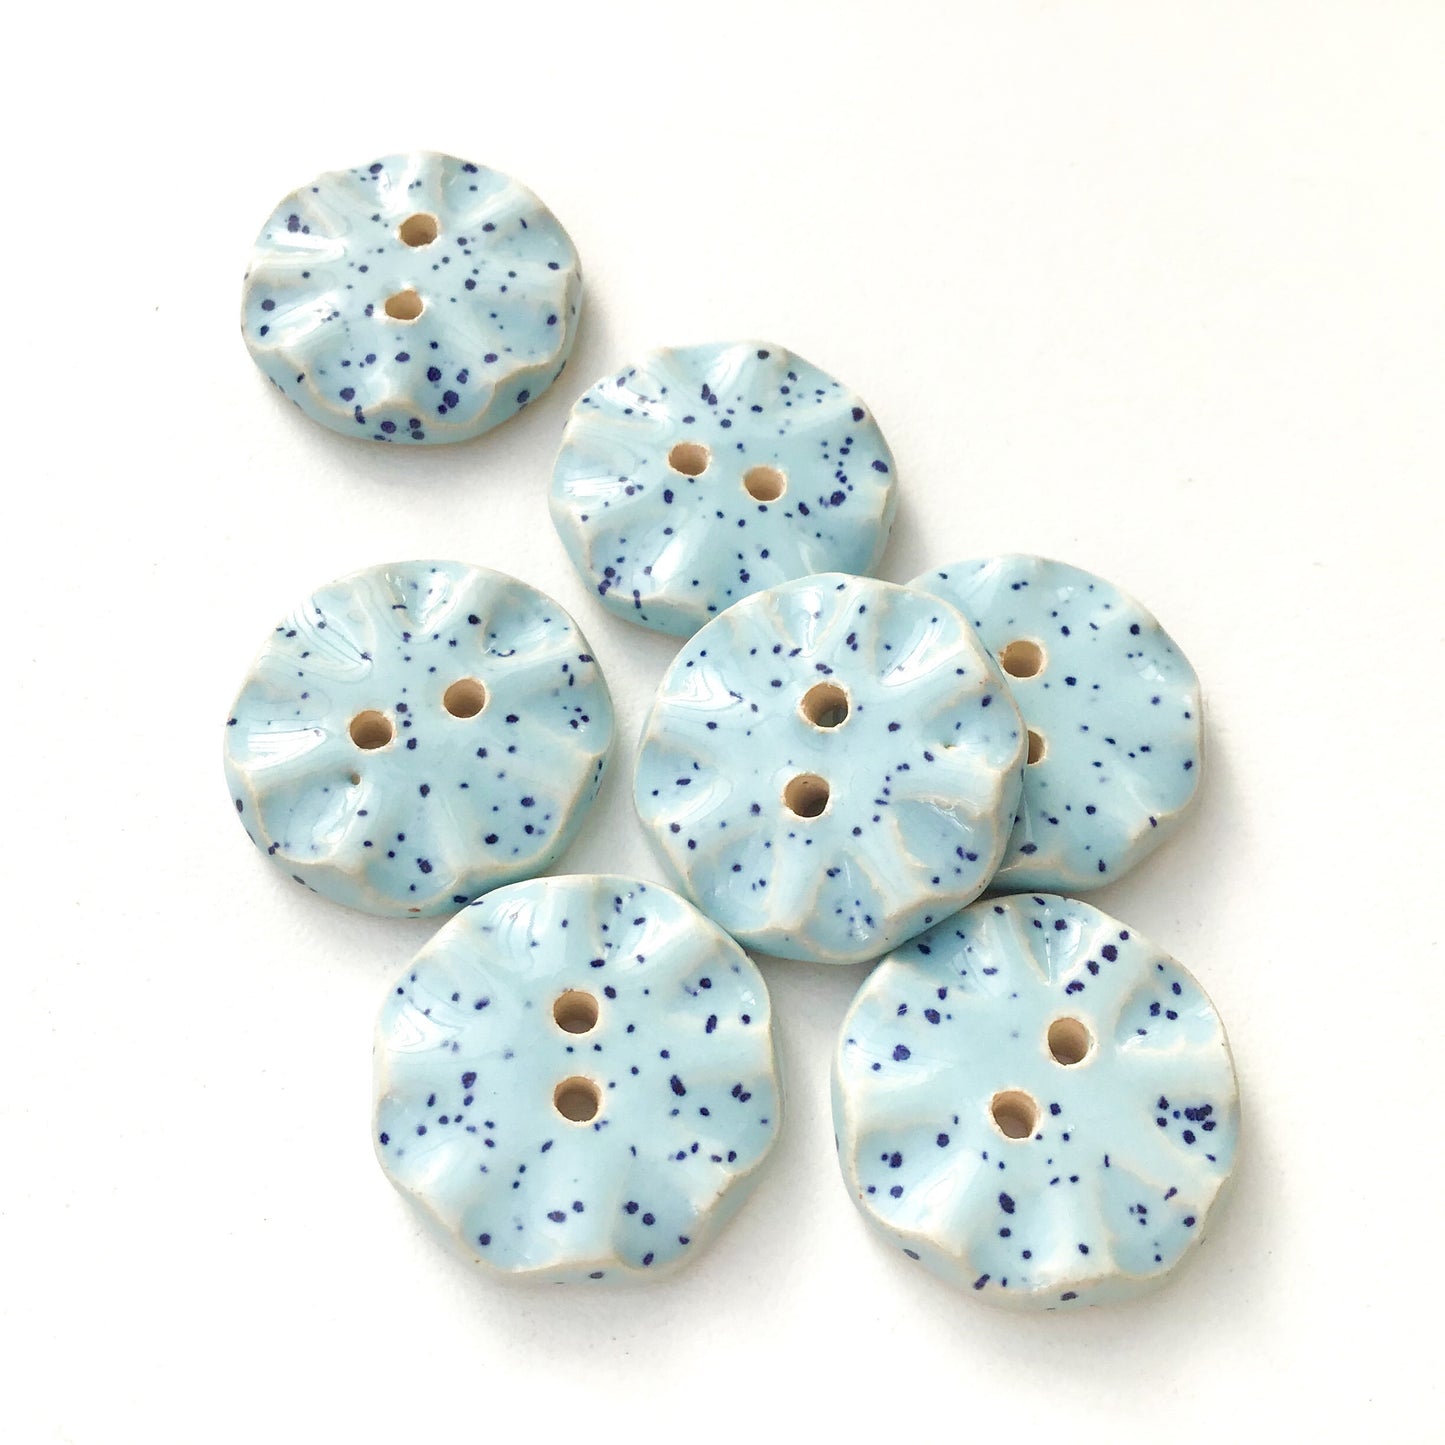 Speckled Light Blue Ceramic Buttons - Sky Blue Clay Buttons - 3/4" - 7 Pack